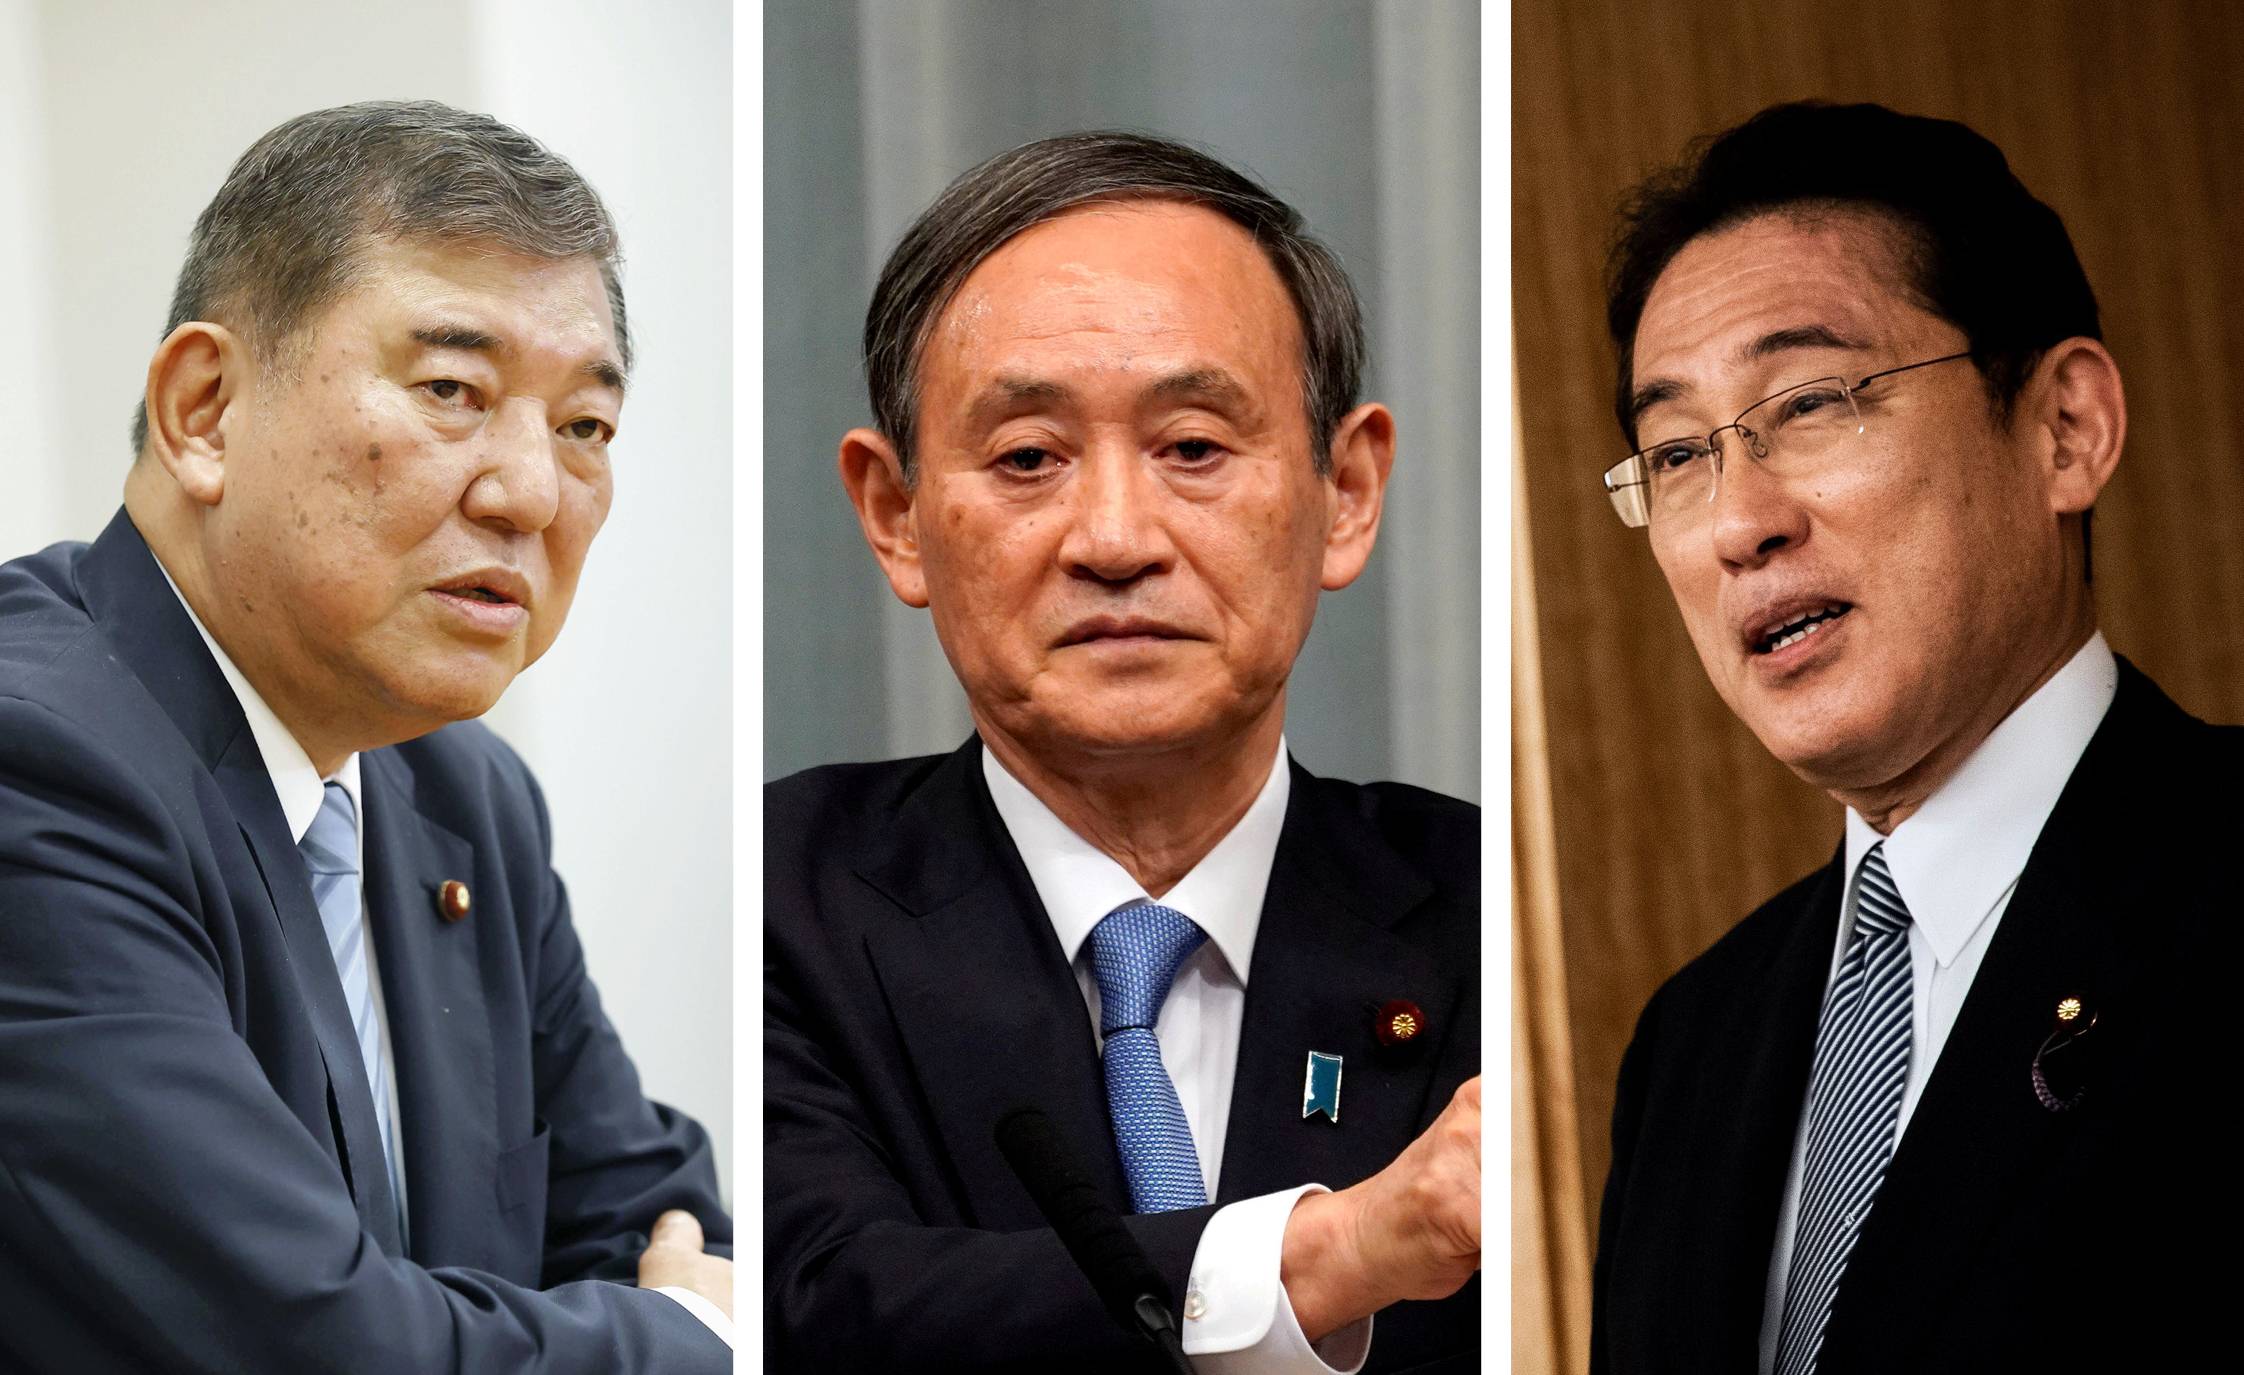 Chief Cabinet Secretary Yoshihide Suga (center) is widely predicted to be a shoo-in for the LDP presidential election, but party policy chief Fumio Kishida (right) and former defense minister Shigeru Ishiba (left) are also in the running. | KYODO, REUTERS, AFP-JIJI